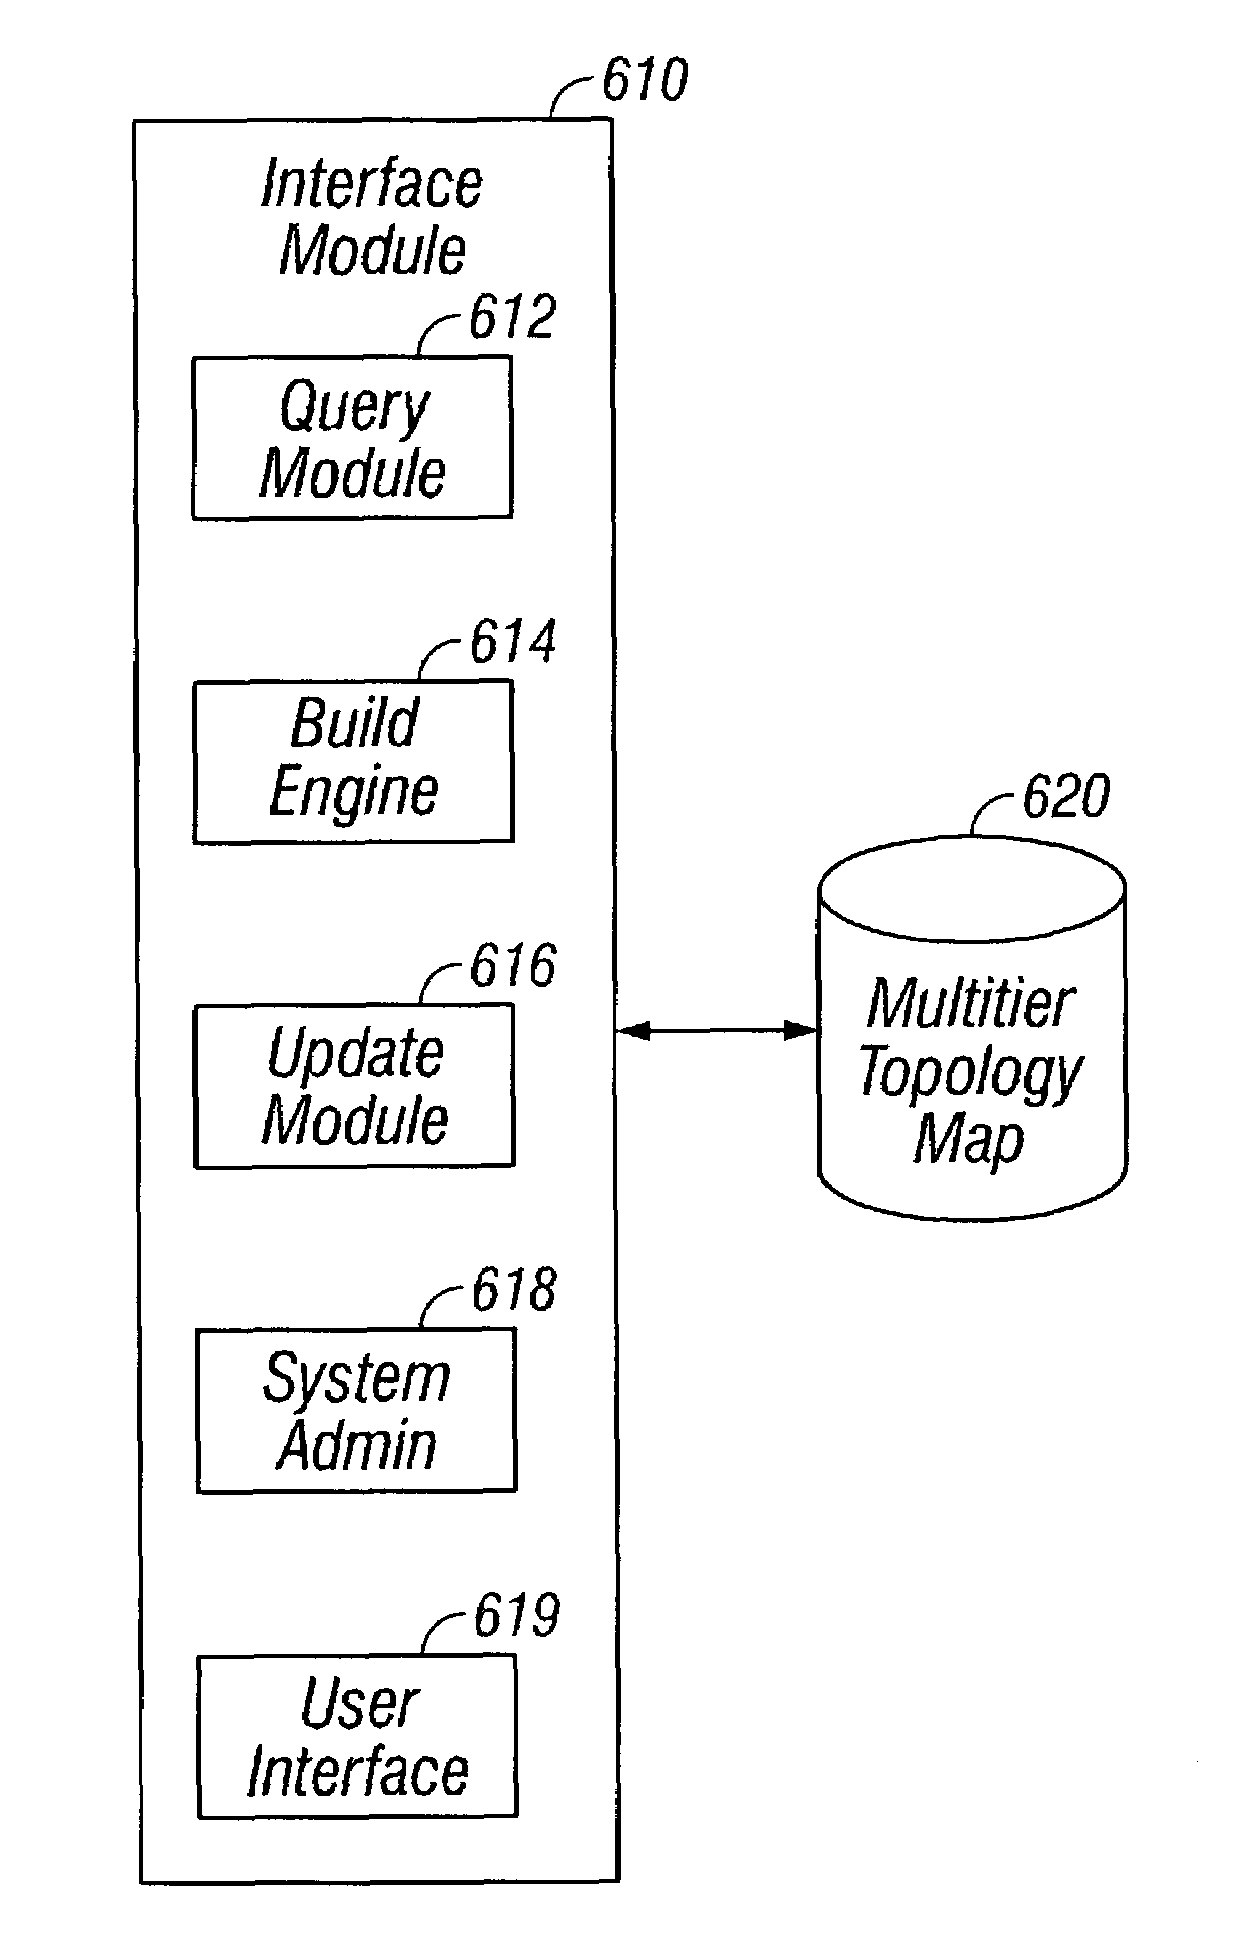 Topology mapping of a multitier compute infrastructure